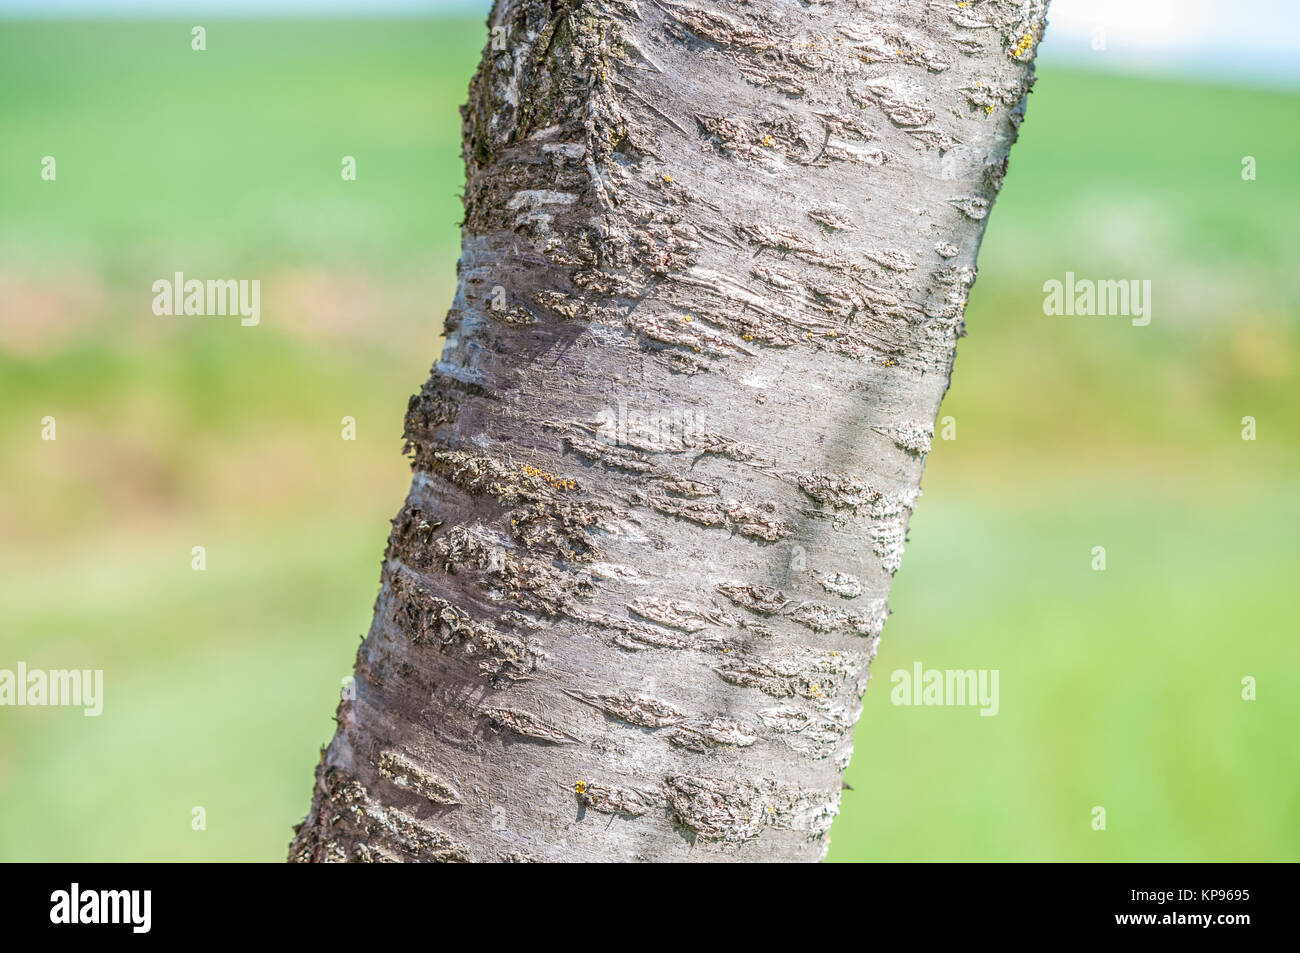 close-up view of the bark of the cherry tree, Prunus cerasus, and a green background. Santpedor, Catalonia, Spain Stock Photo